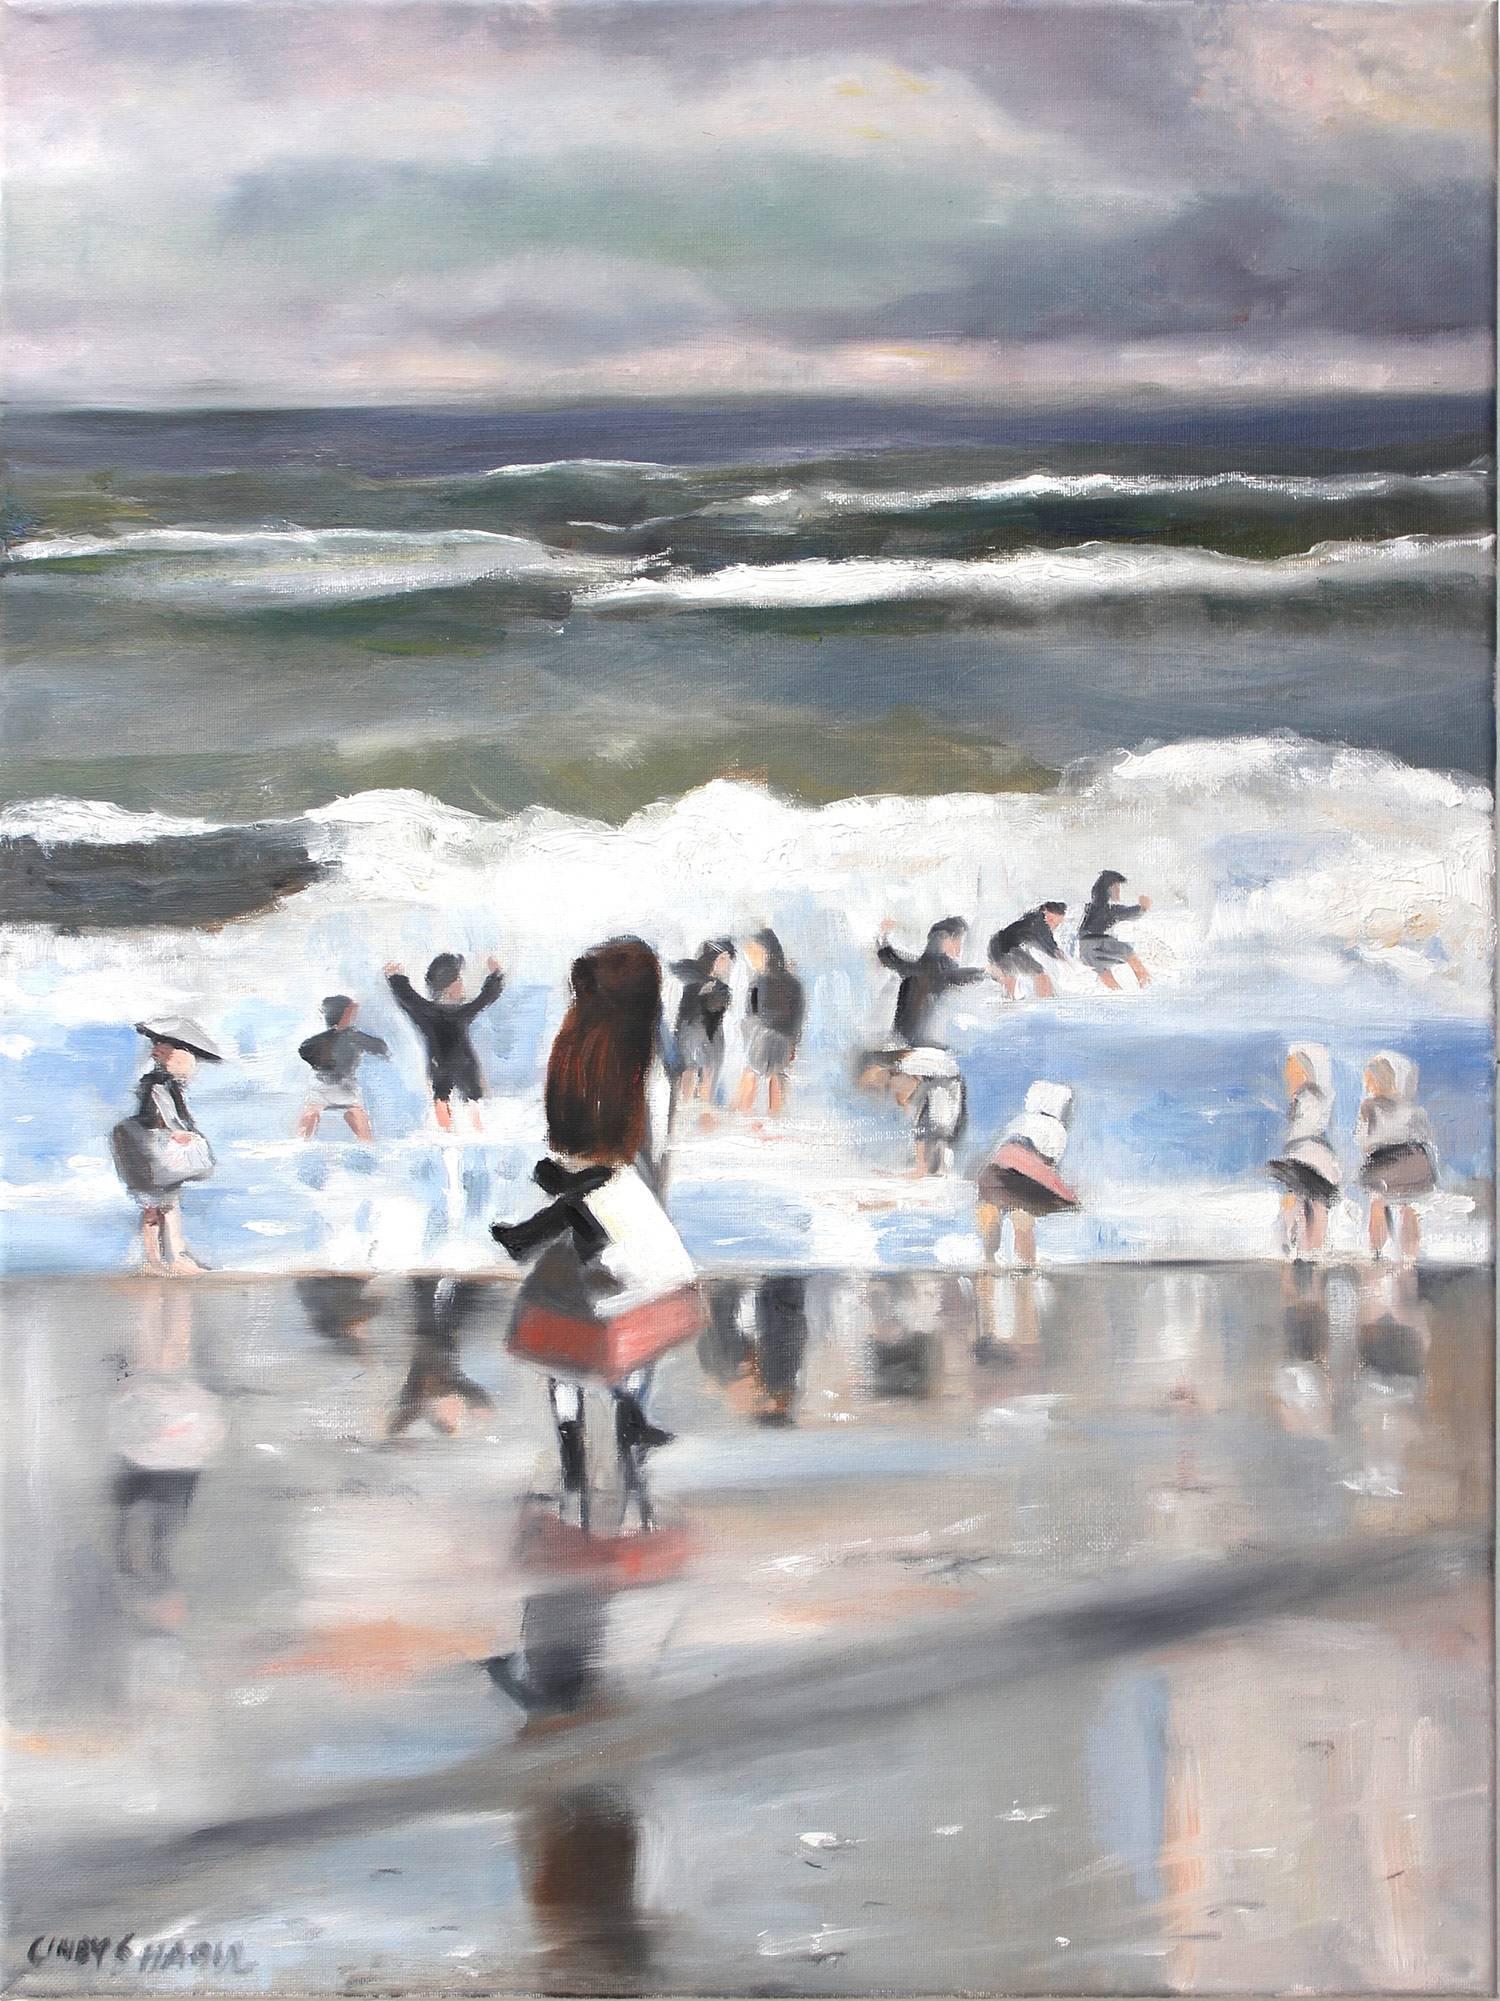 "A Summer Day at the Beach" Impressionistic Beach Scene Oil Painting on Canvas